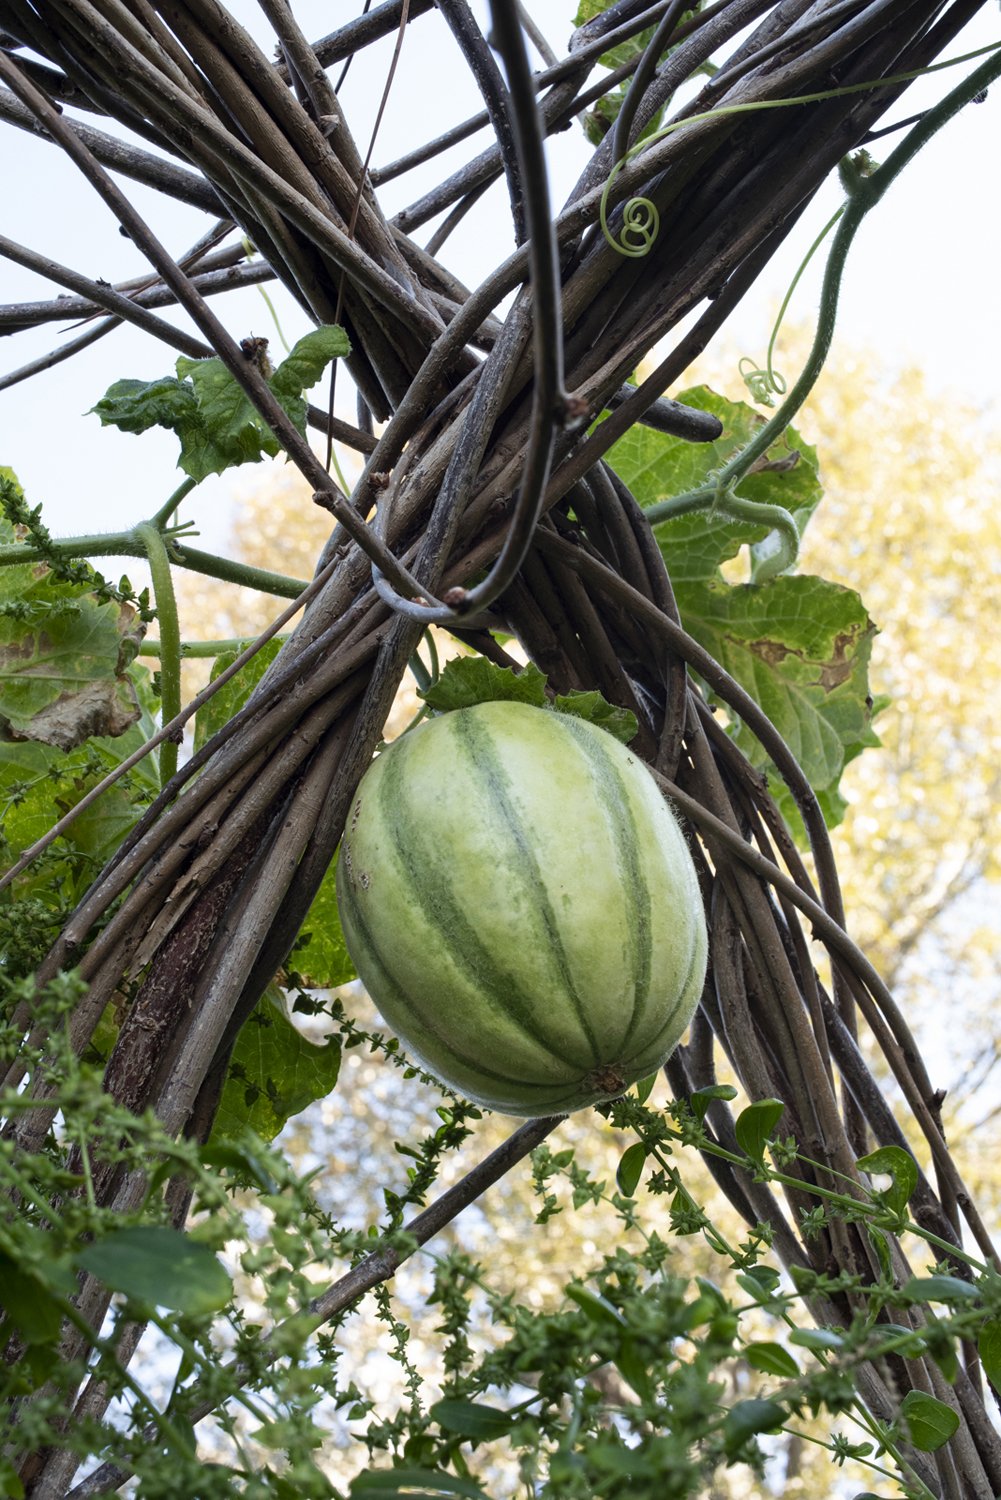  Detail of a ripe melon on the arbor, October 2022 